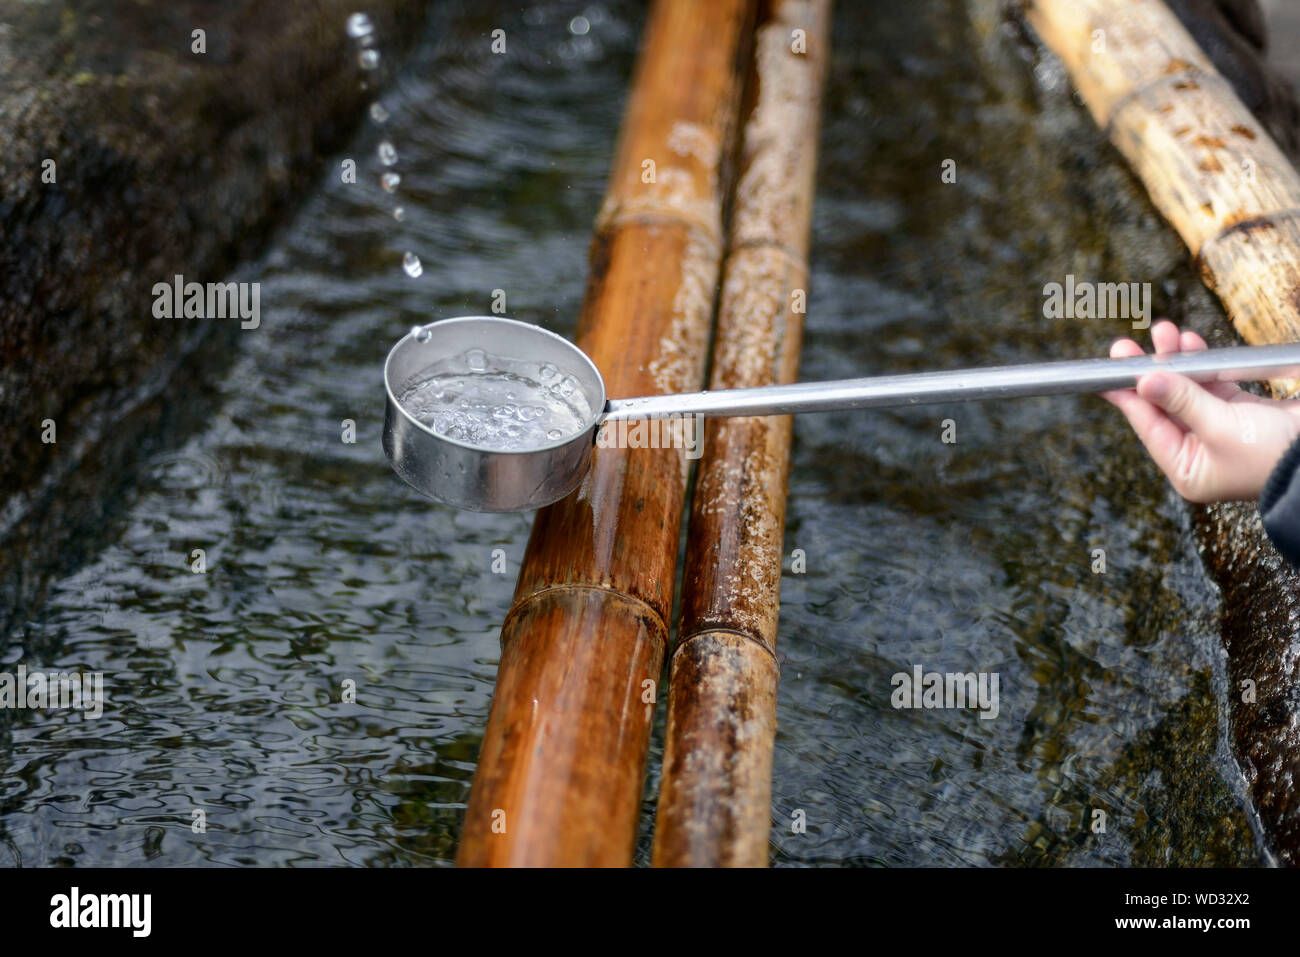 Cropped Hand Holding Ladle Over Bamboo And Water Stock Photo